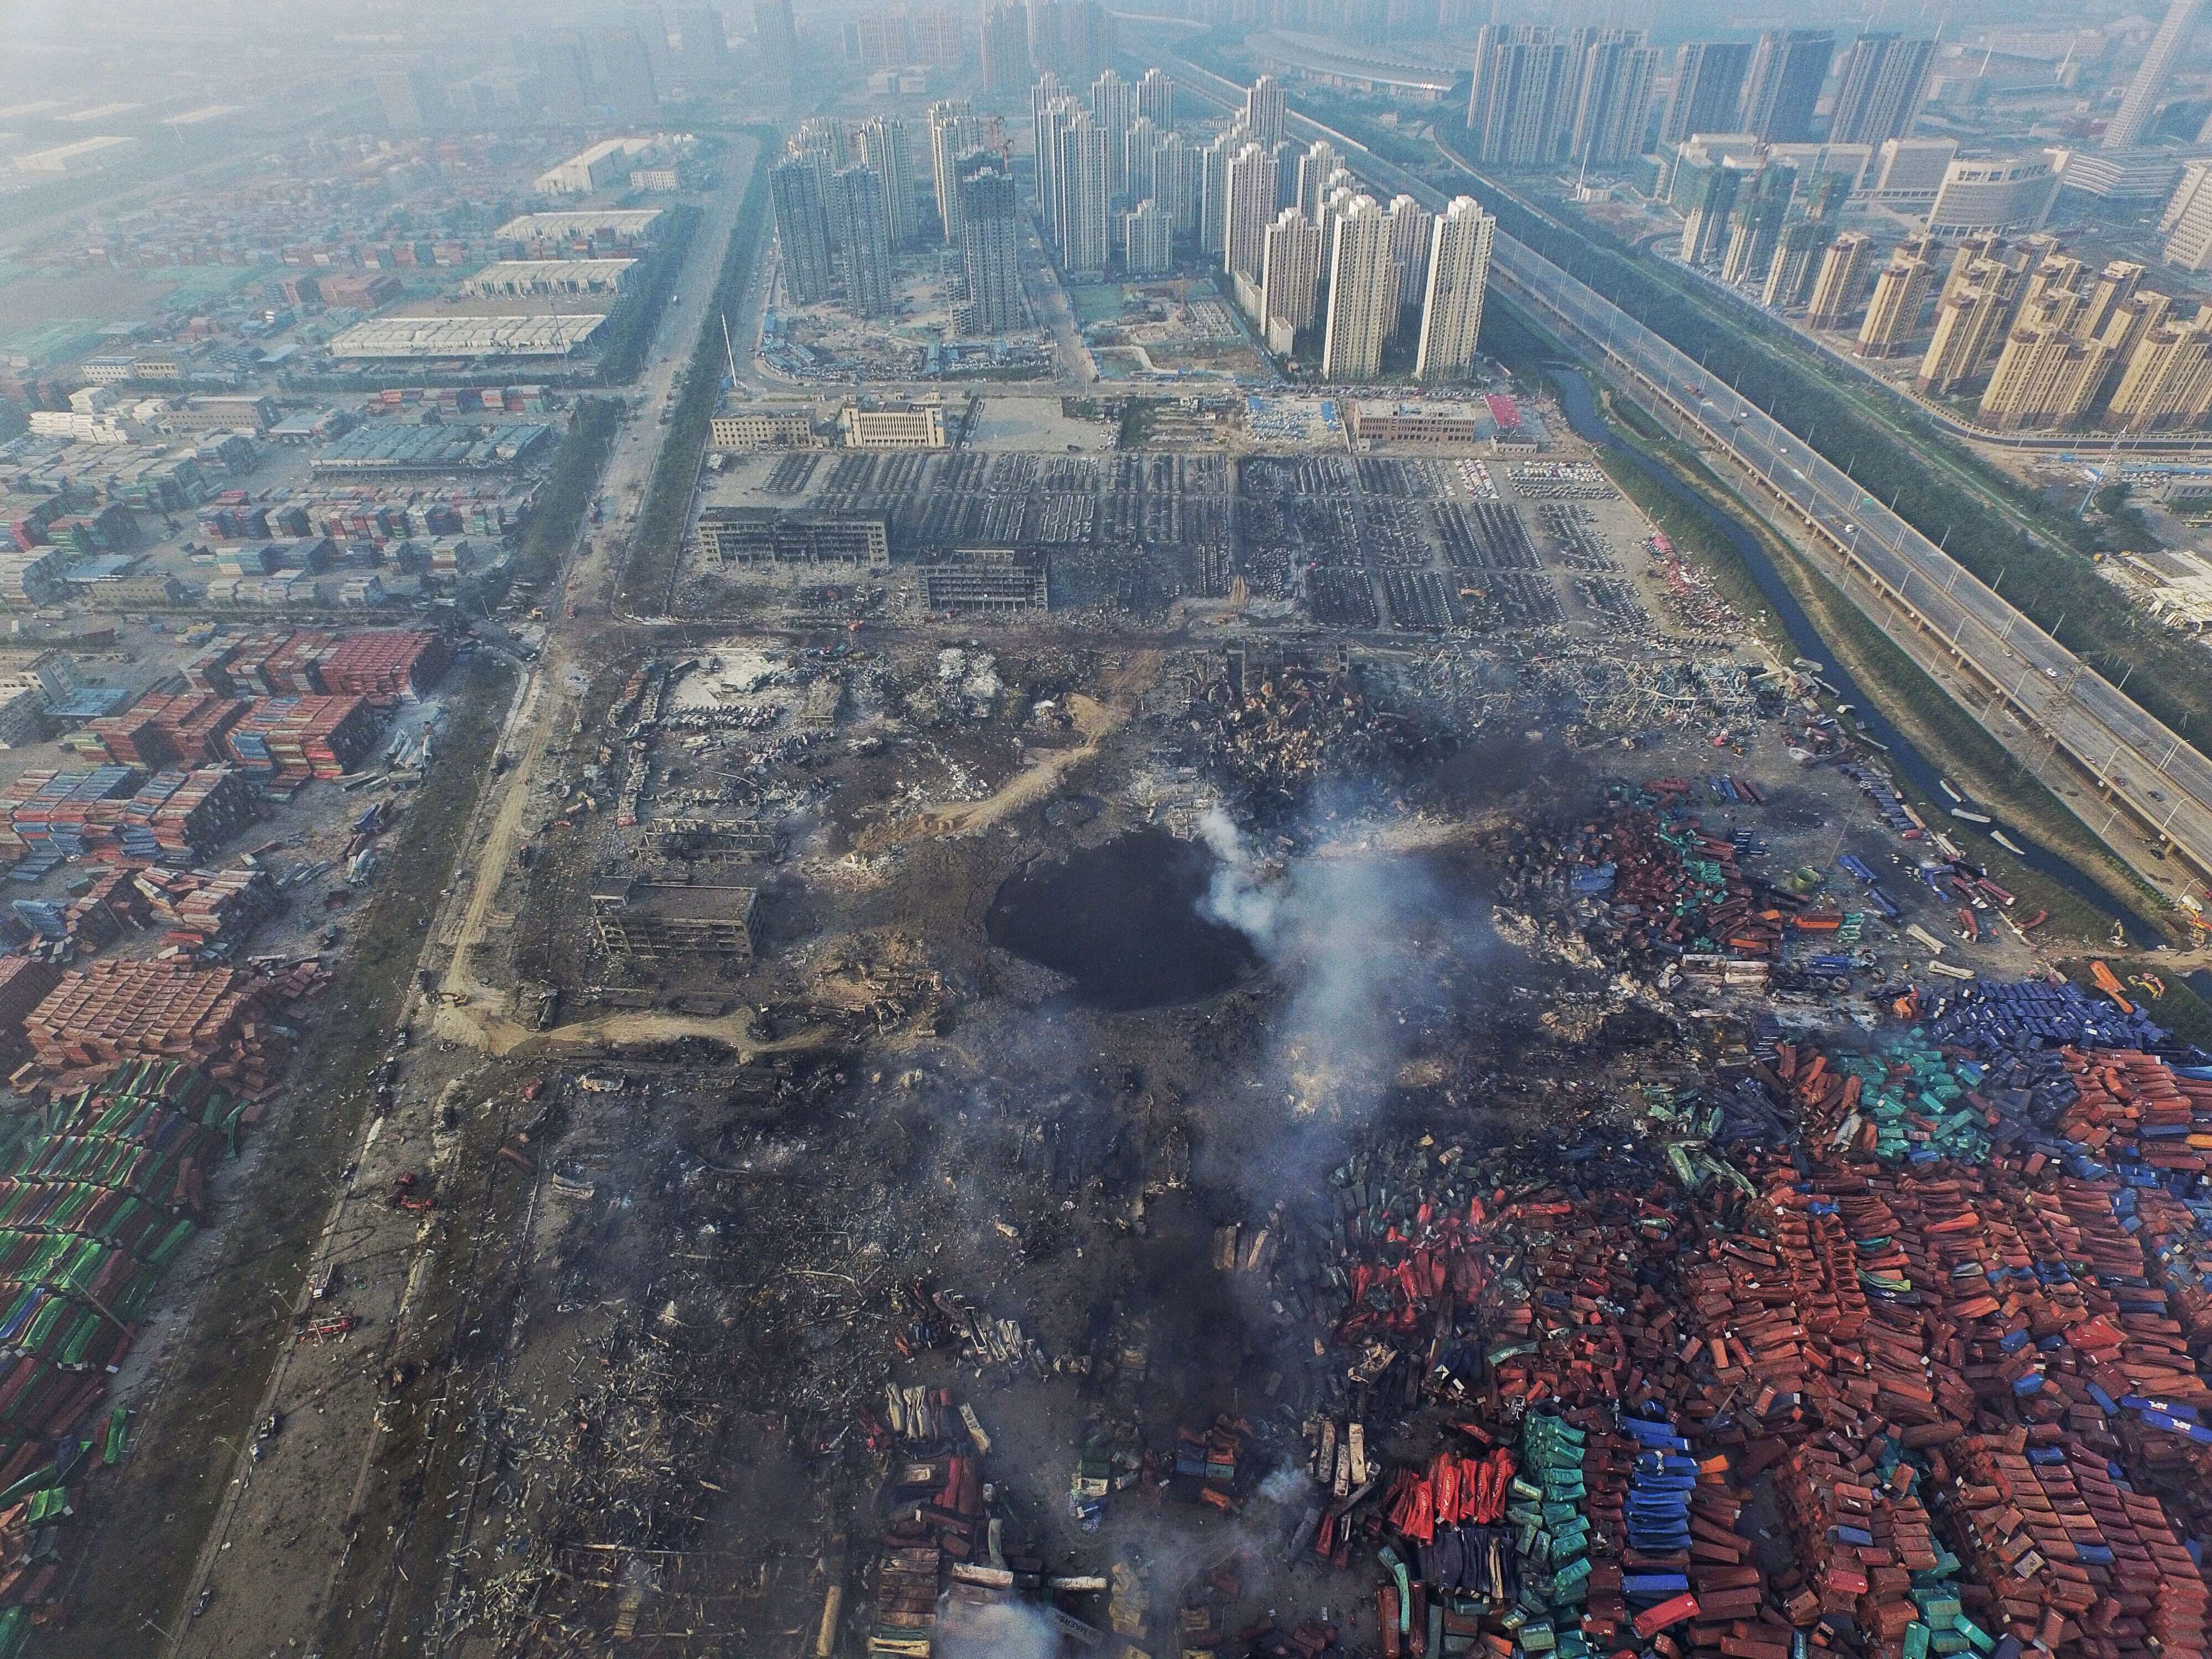 An aerial view of the aftermath of the huge explosions and fire that rocked the port city of Tianjin, China, in August 2015. Photo: EPA